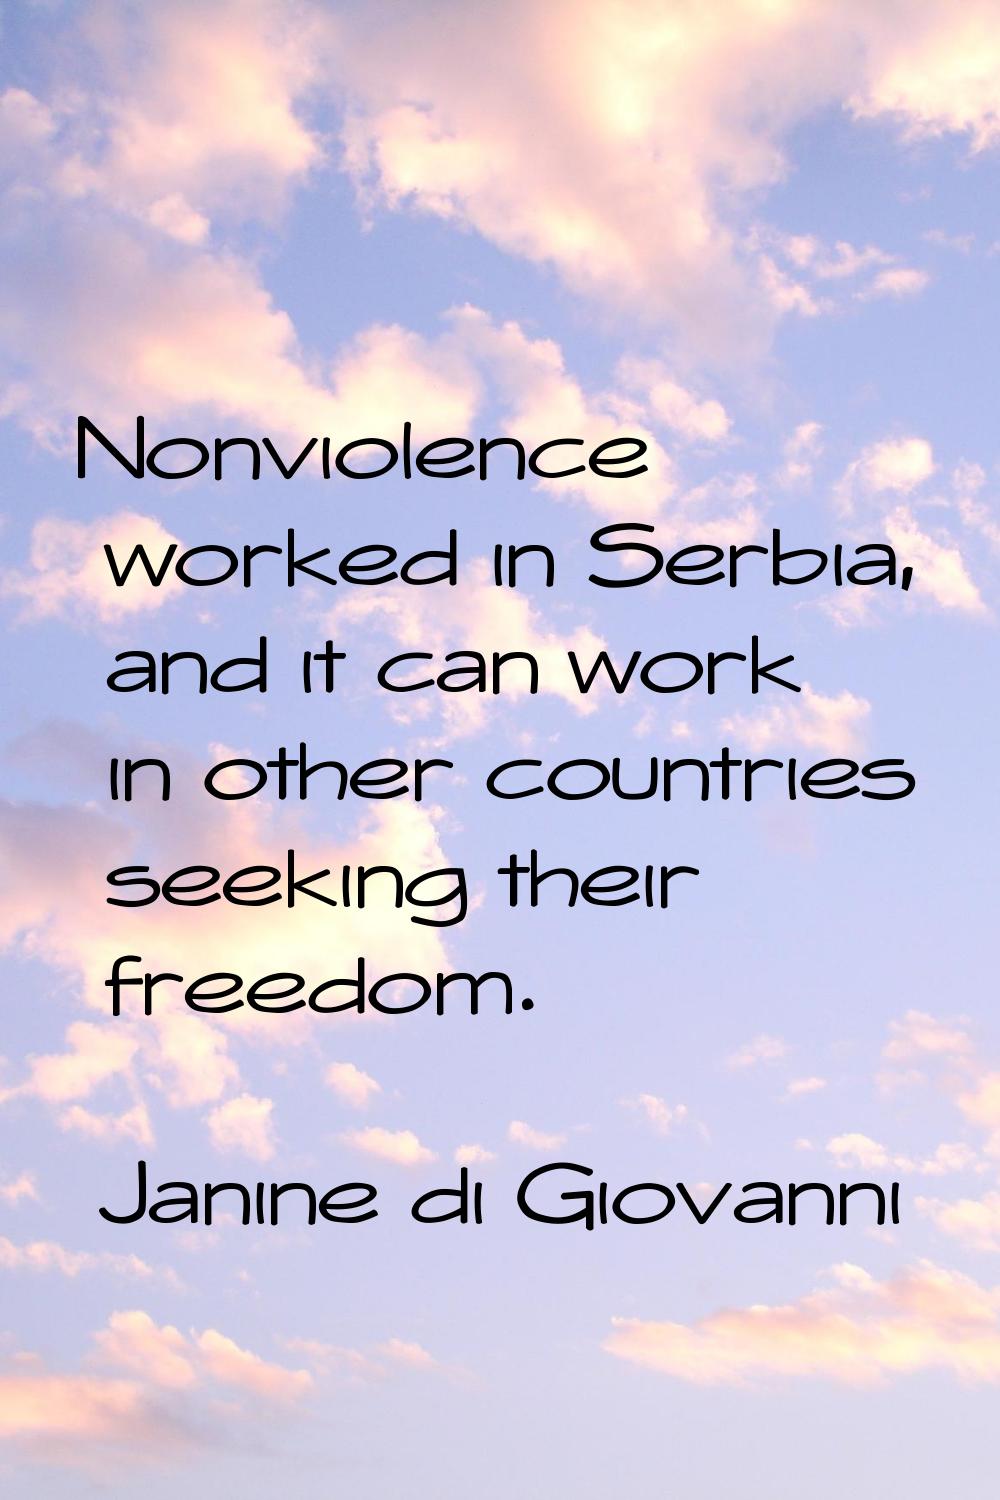 Nonviolence worked in Serbia, and it can work in other countries seeking their freedom.